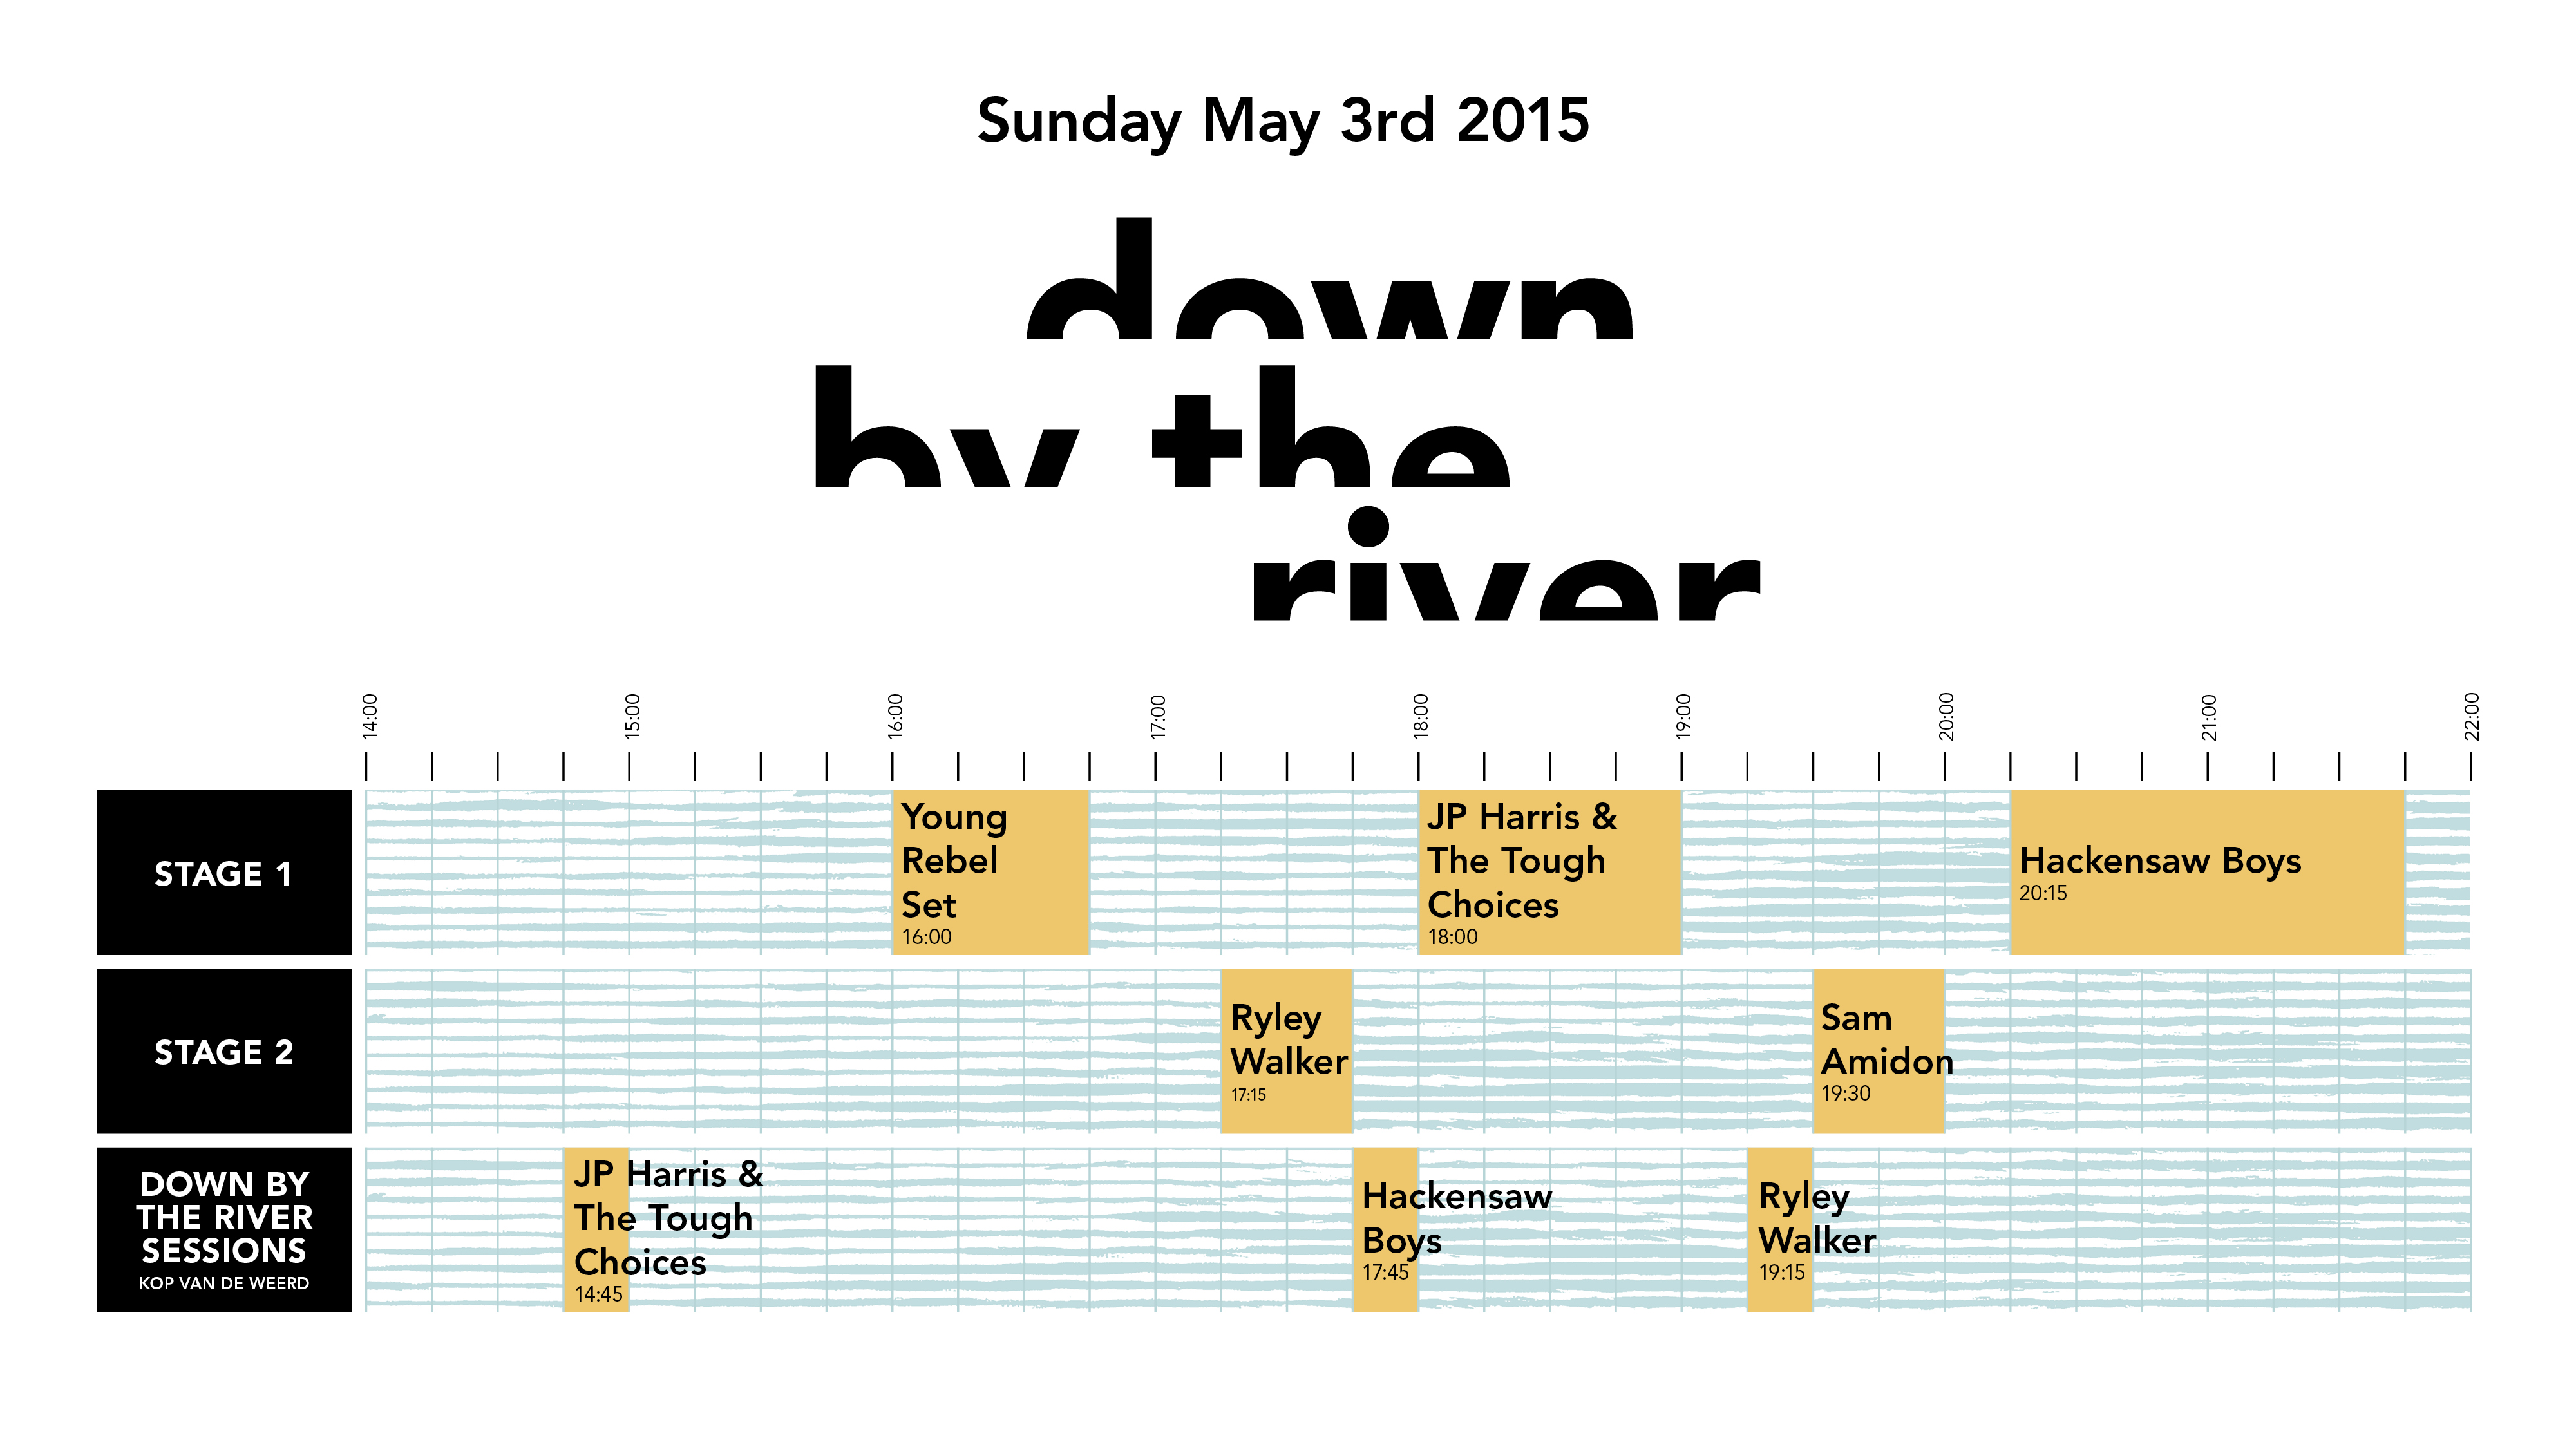 THIS WEEKEND it's time for DOWN BY THE RIVER, including Hackensaw Boys, J.P. Harris & The Touch Choi